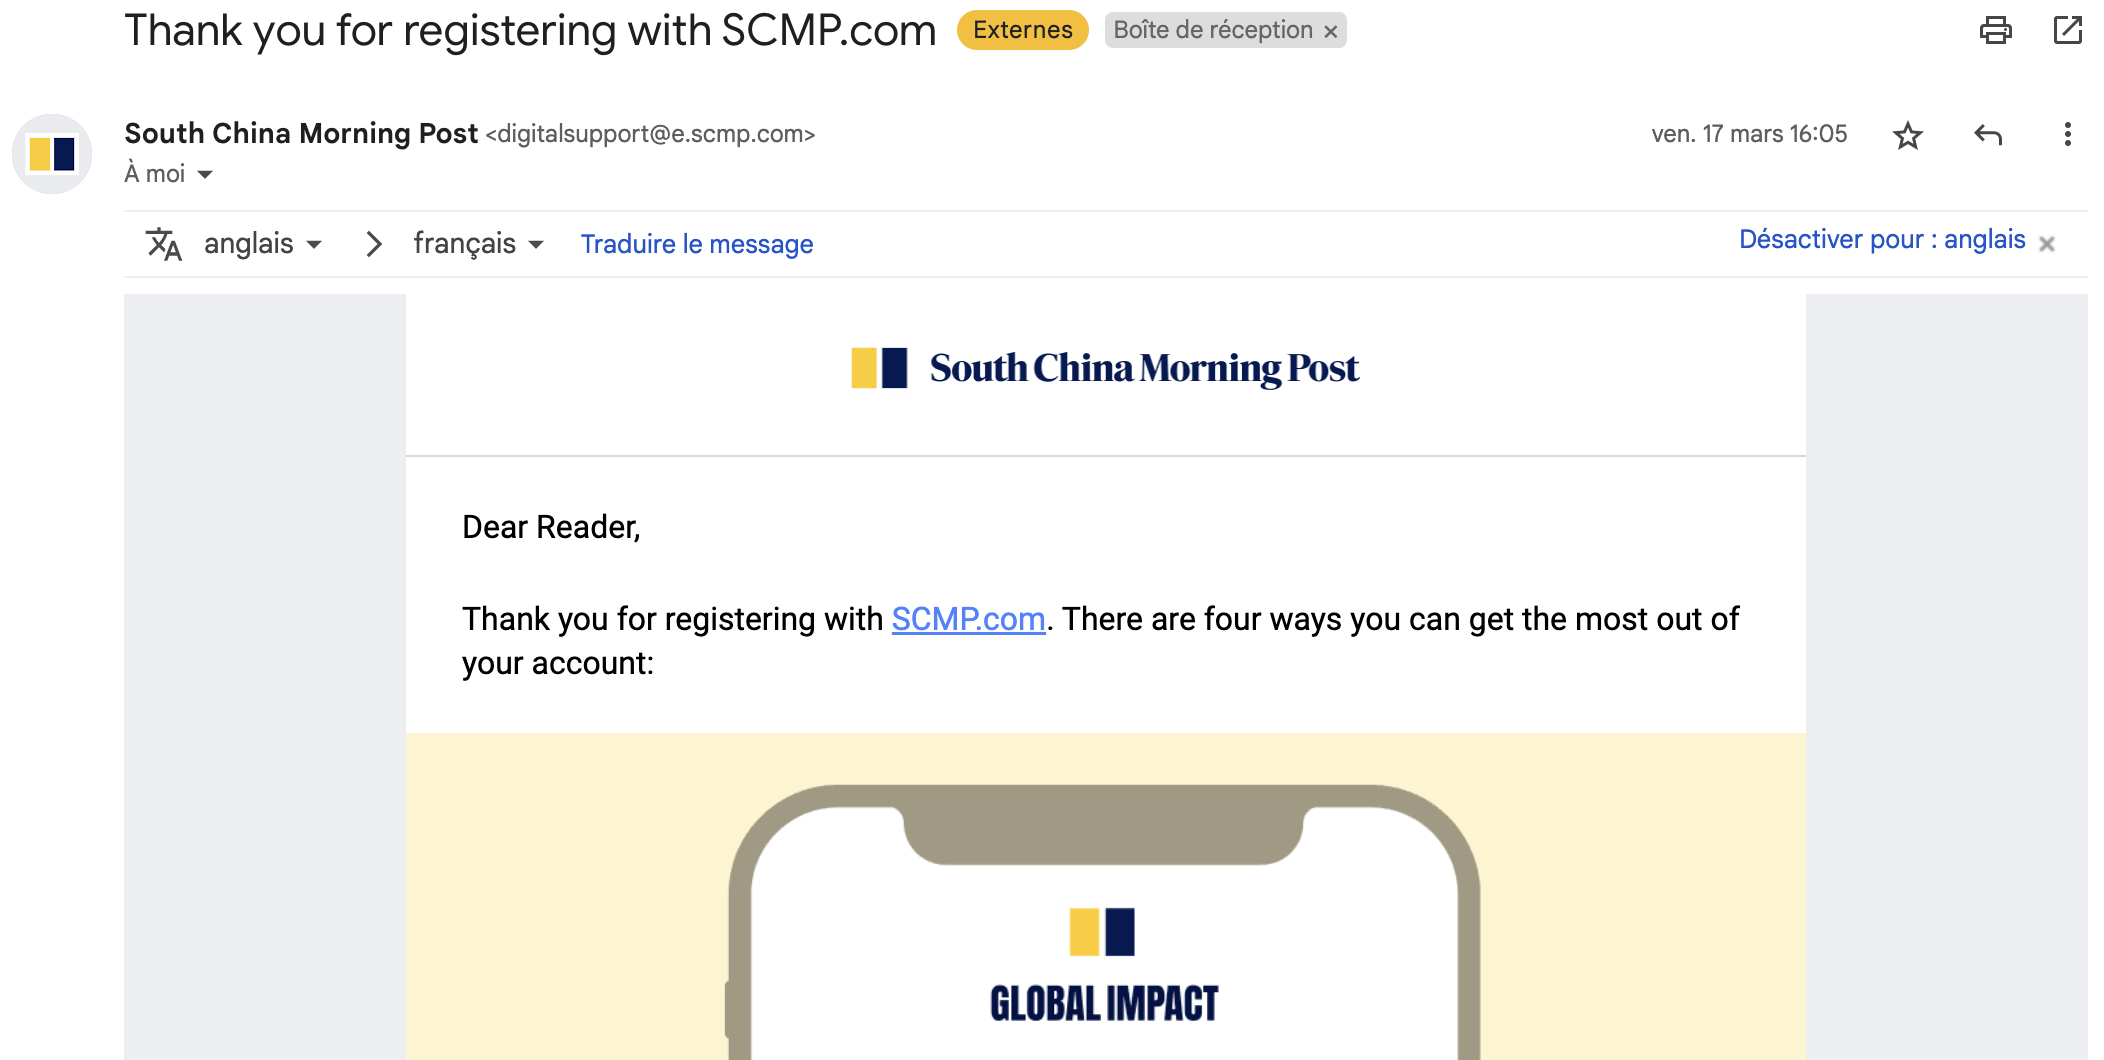 The South China Morning Post's onboarding email